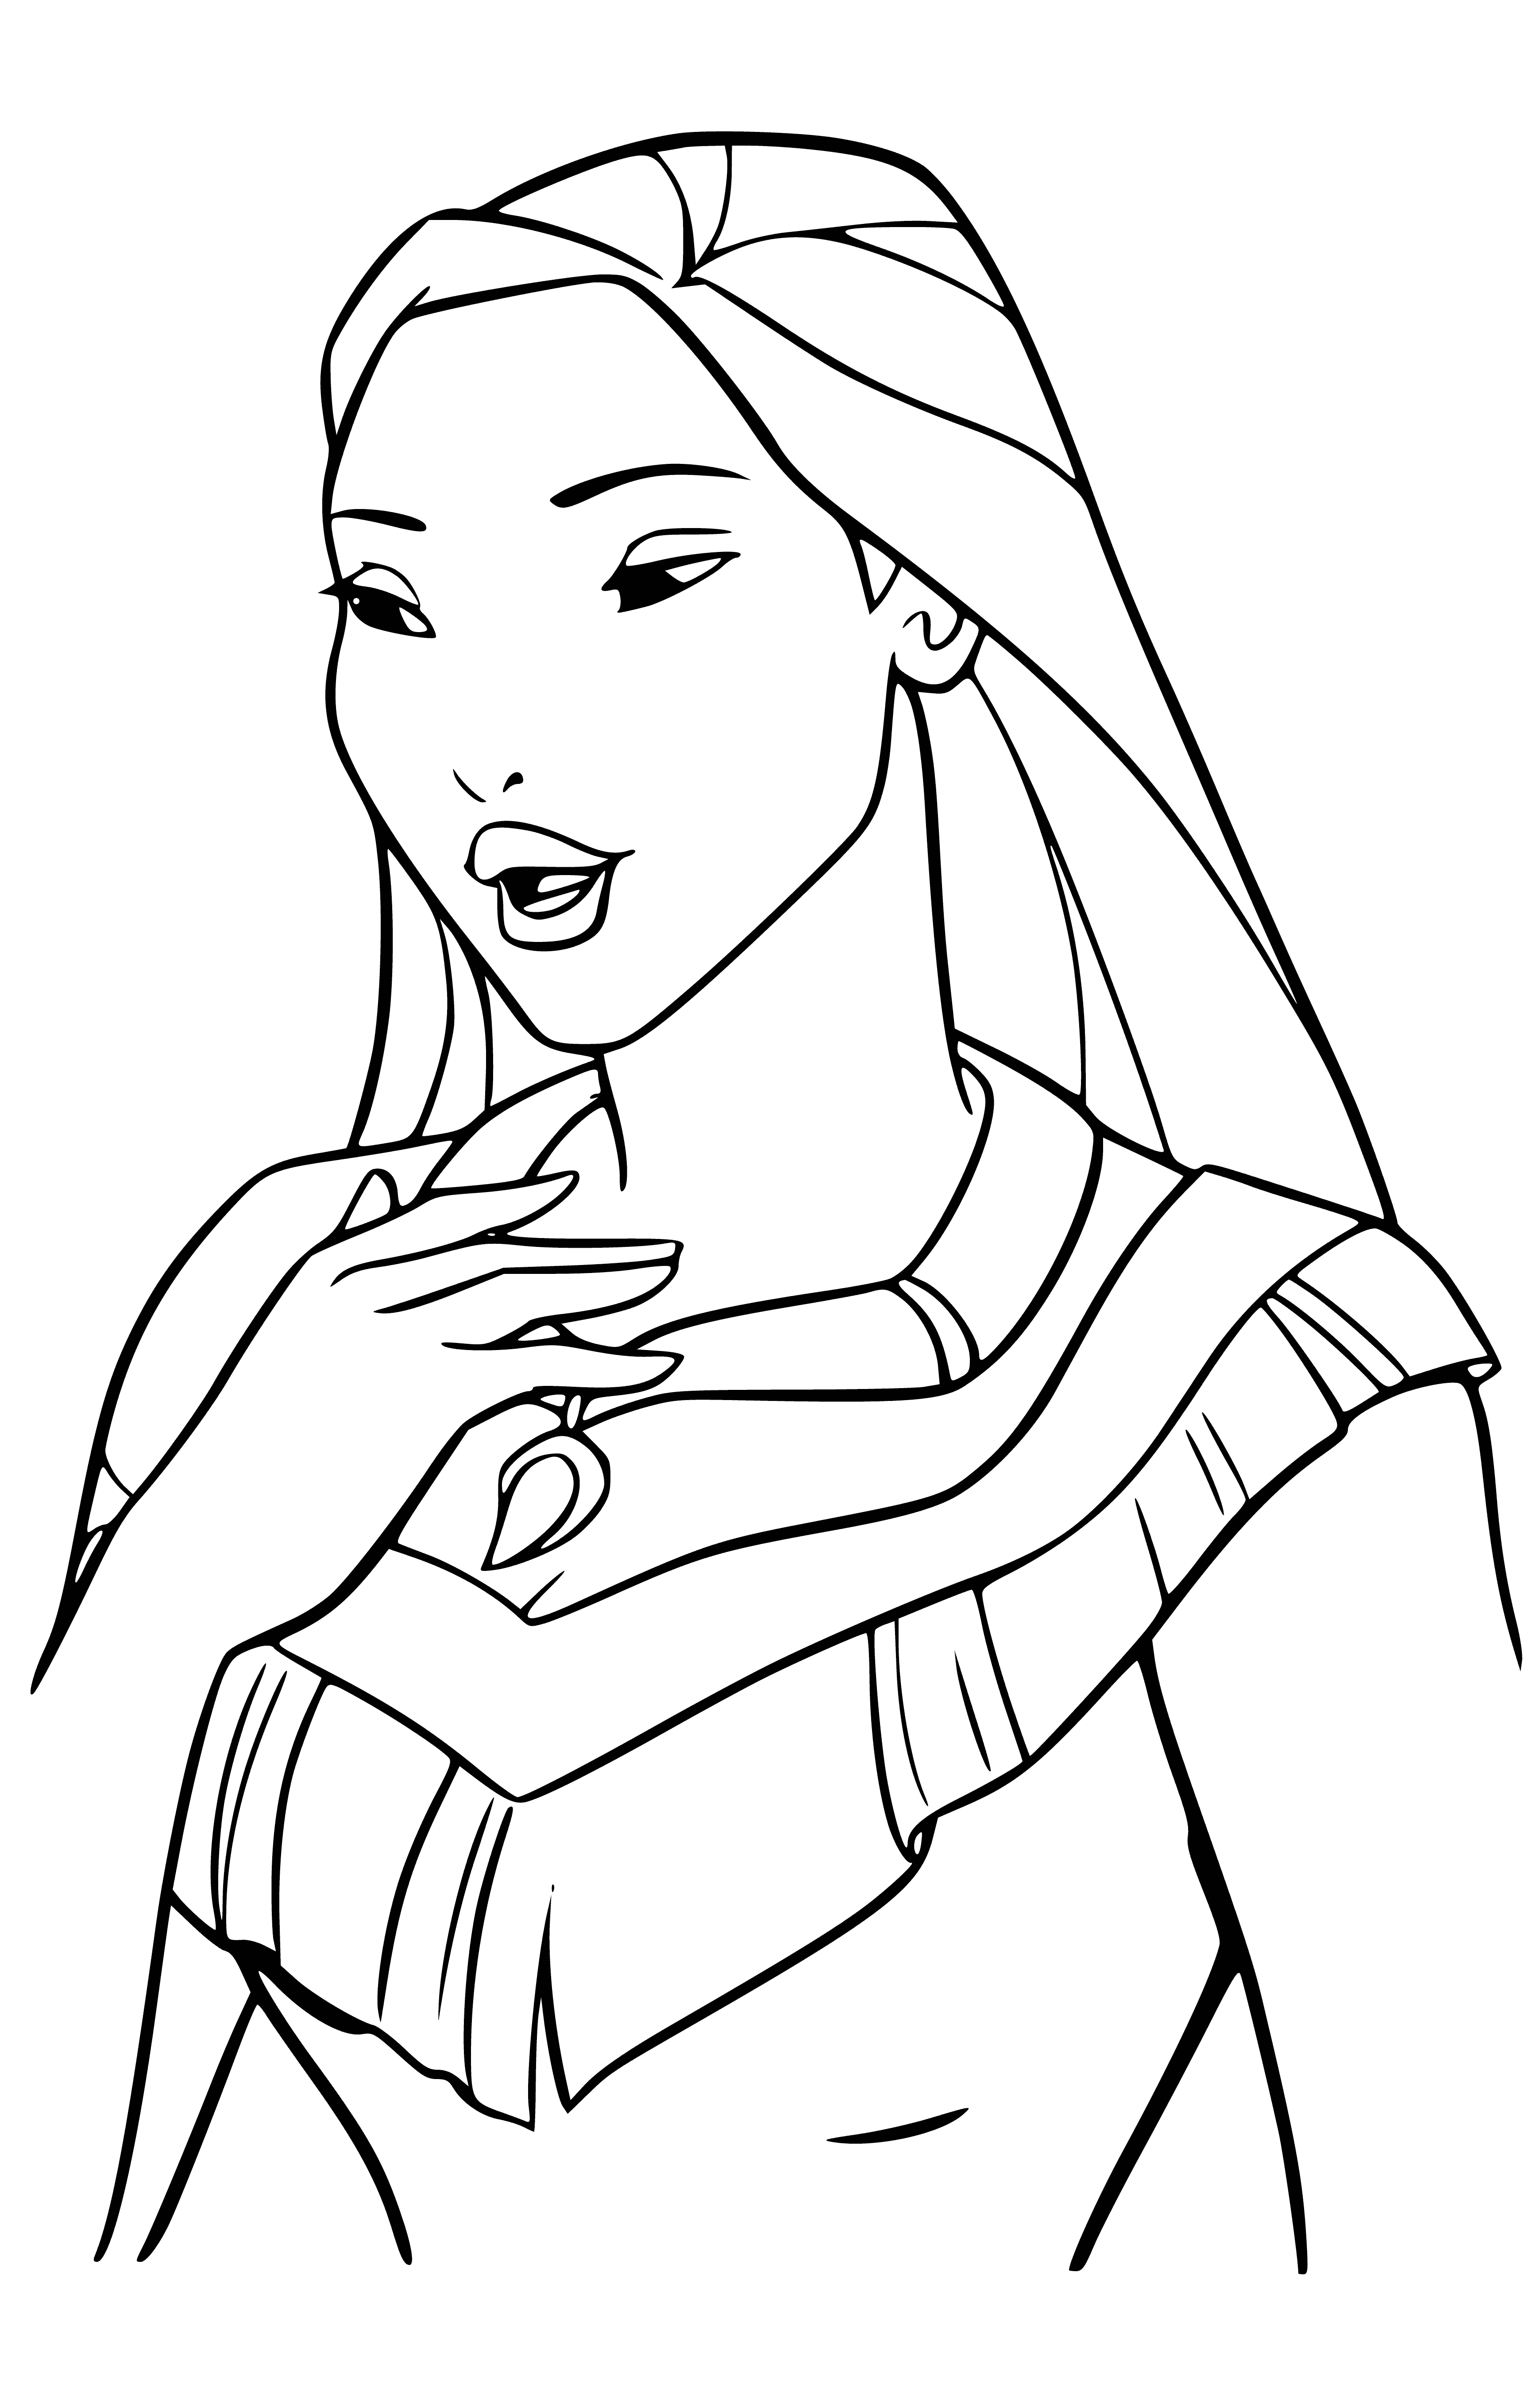 coloring page: Pocahontas stands in a traditional dress and headdress, welcoming a group, with one hand extended while her face is framed by two curl strands.